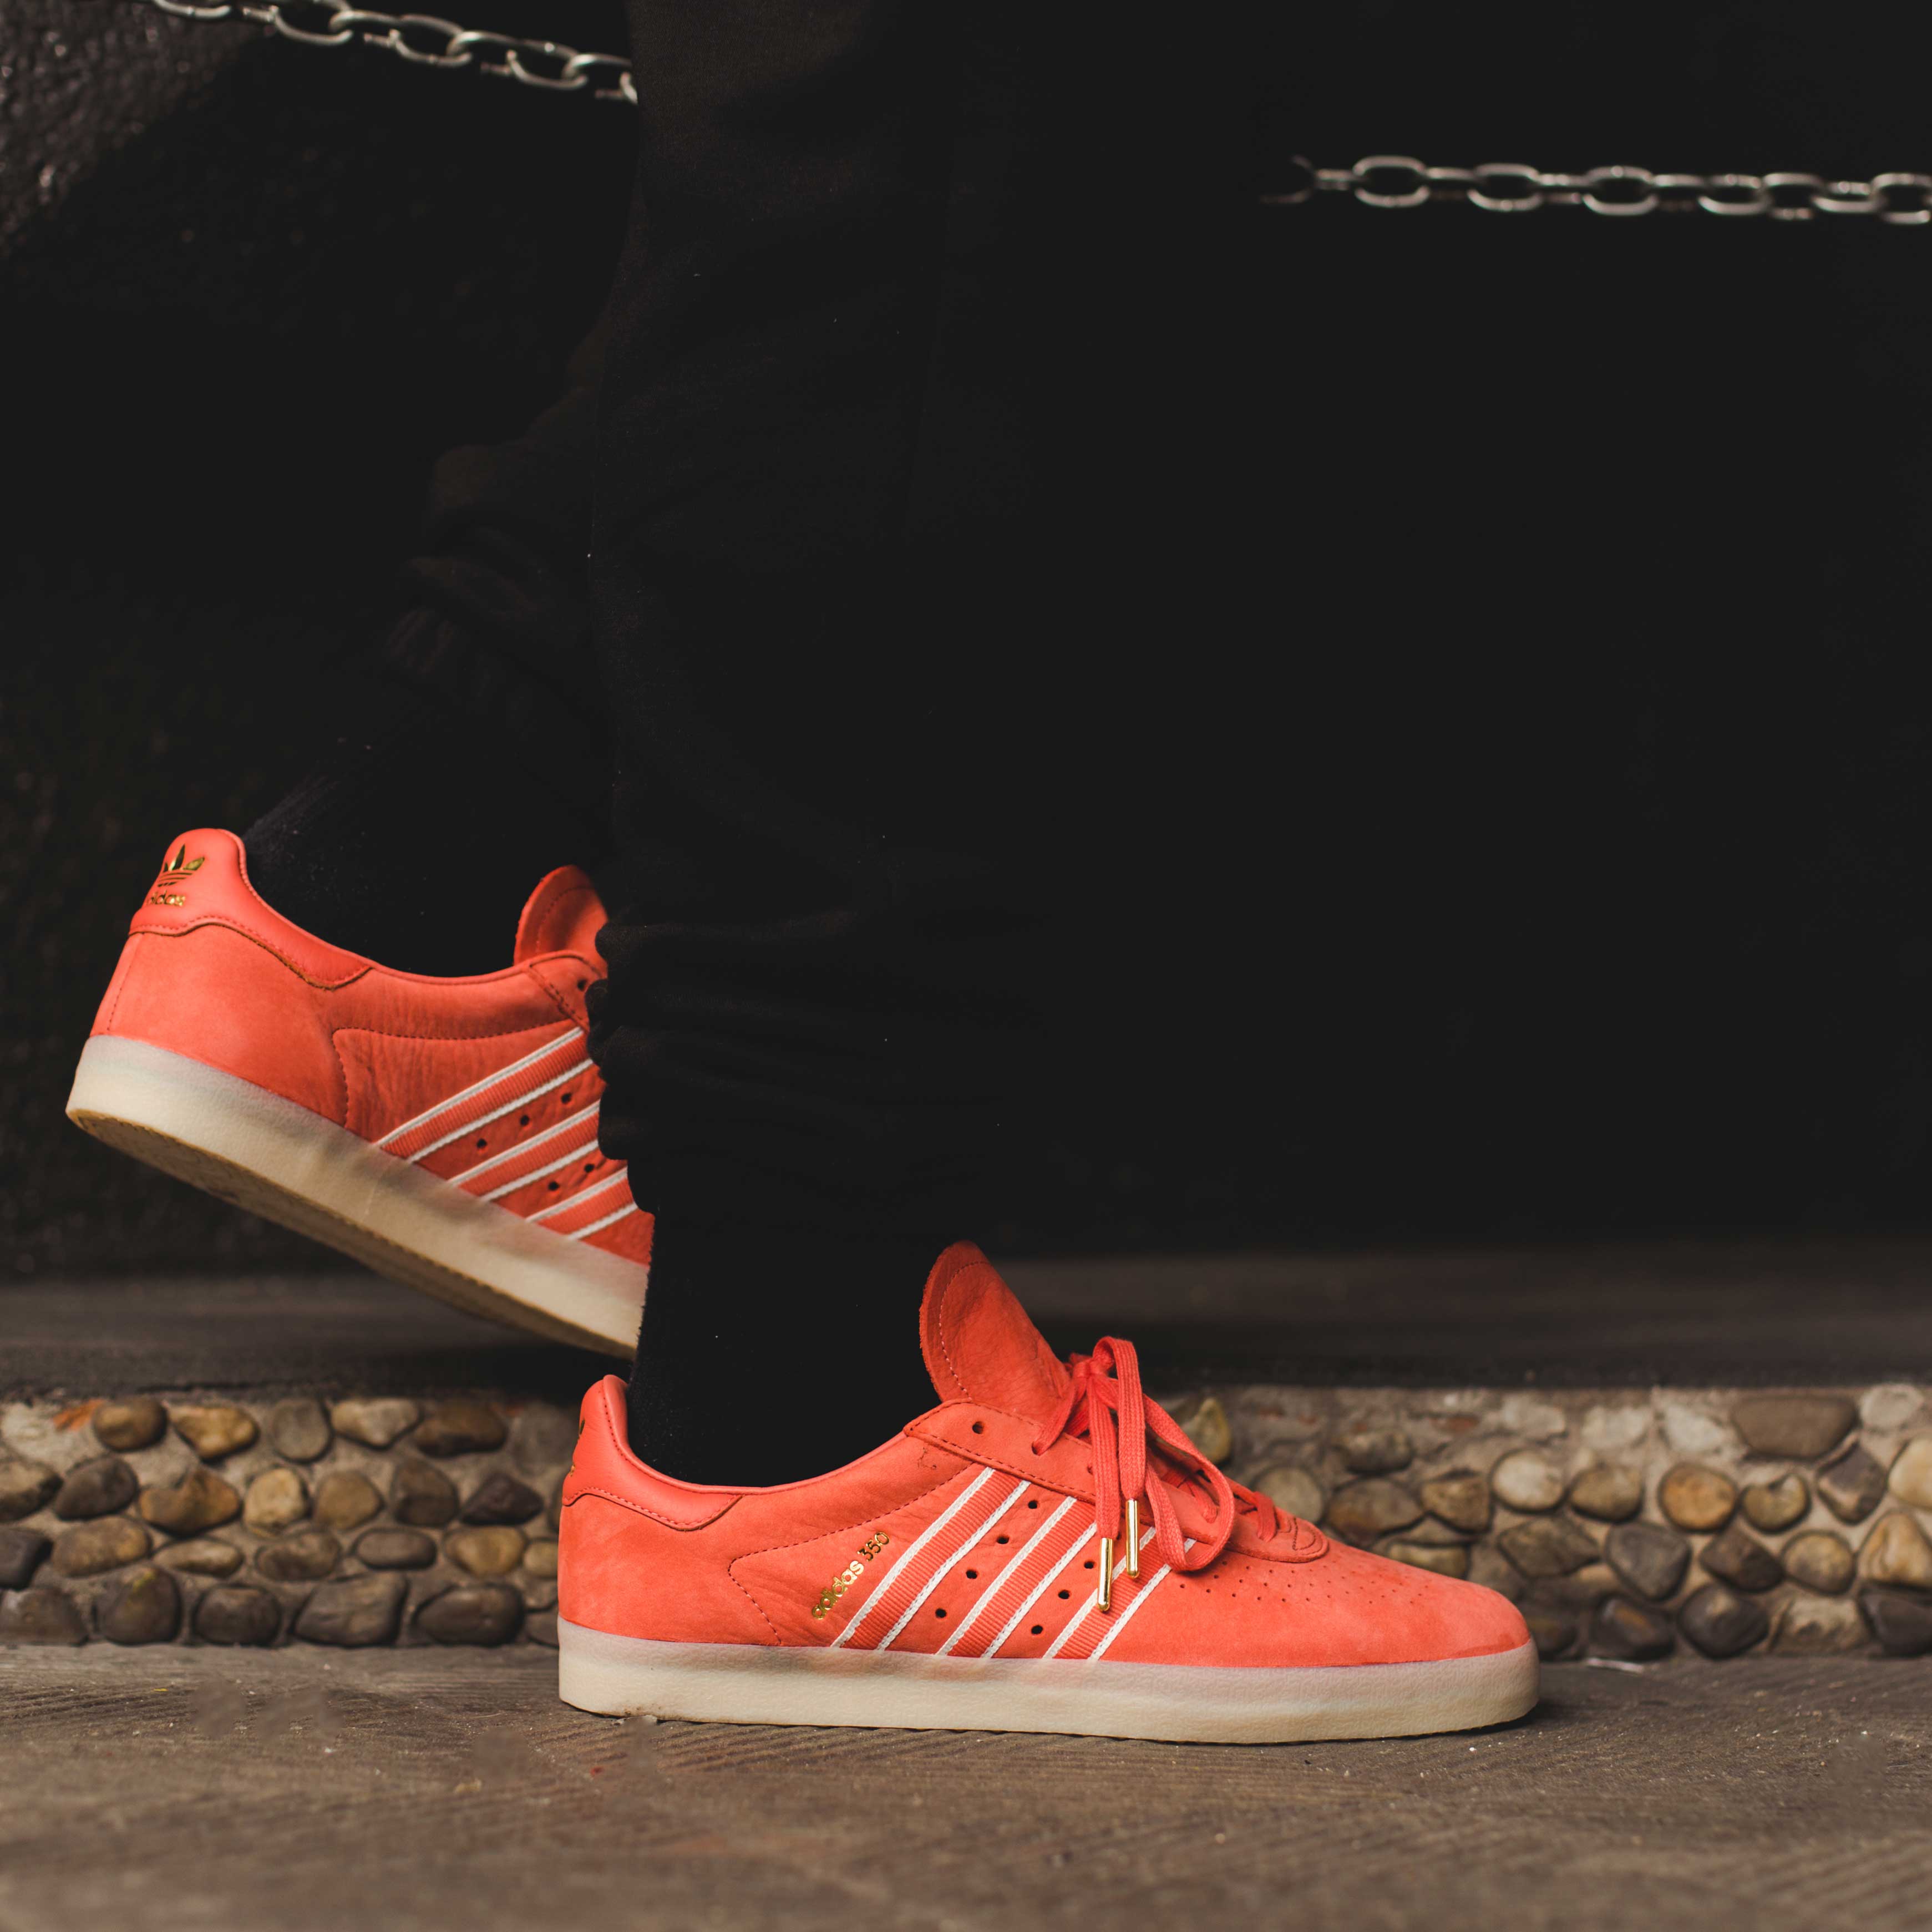 FOOTDISTRICT on Twitter: "Traveling is a Sport. You traveling? adidas x Oyster Holdings 350 in Trace Scarlet with branding. In store &amp; online: https://t.co/Na6G76i0l3 #adidasoriginals #oysterholdings #travelingisasport ...